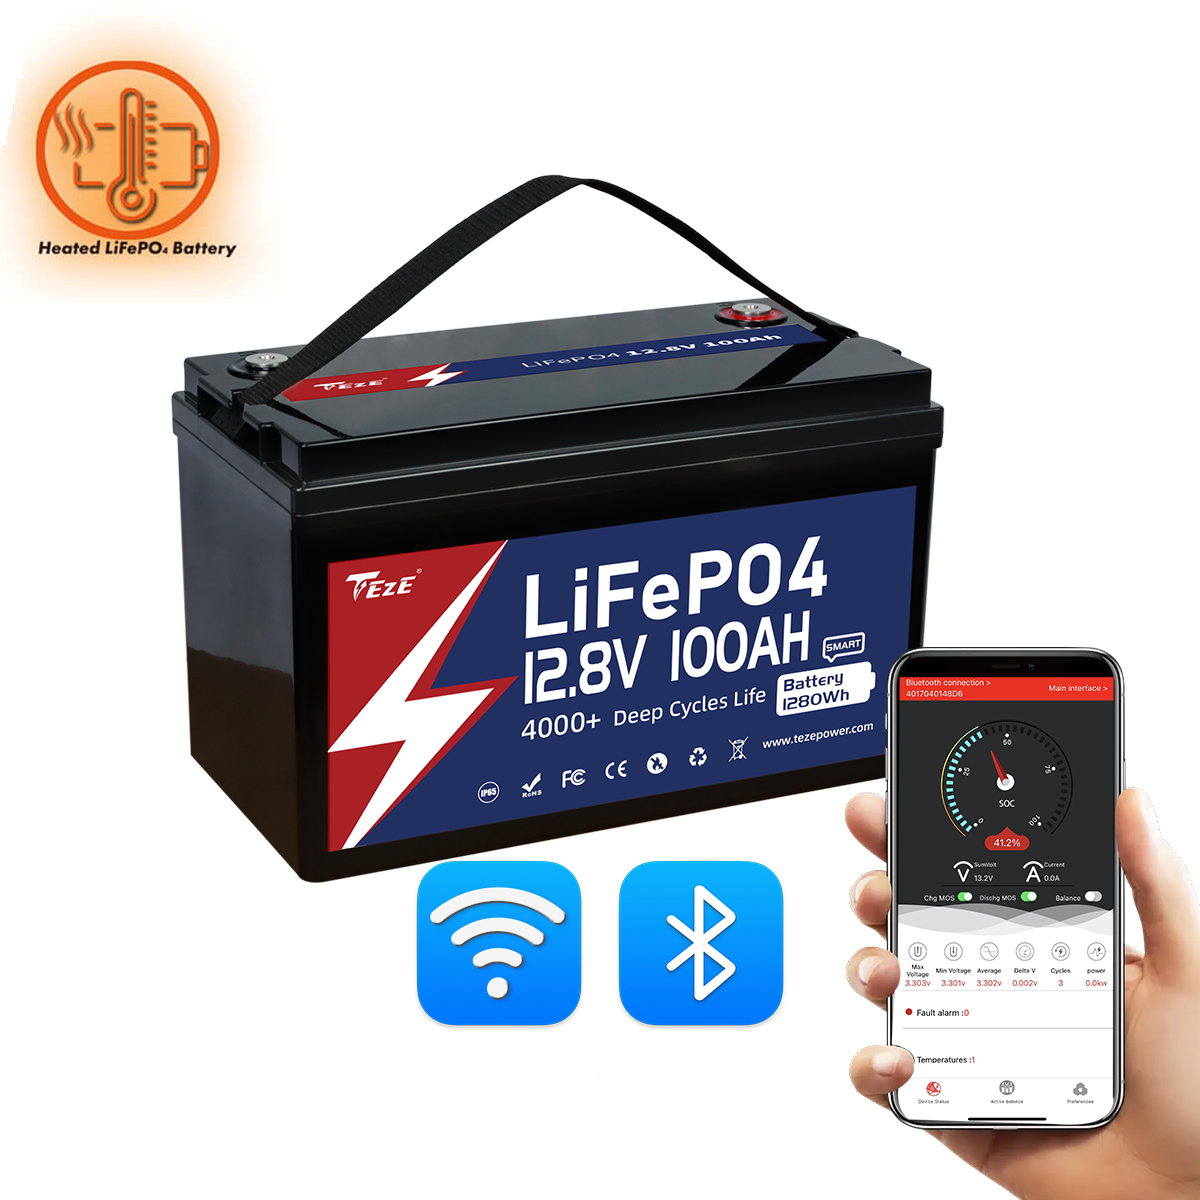 New Add WiFi-TezePower 12V 100Ah LiFePO4 Battery with WiFi and Bluetooth, Self-heating and Active Balancer, Built-in 100A Daly BMS(WiFi Built-in Version)-TezePower